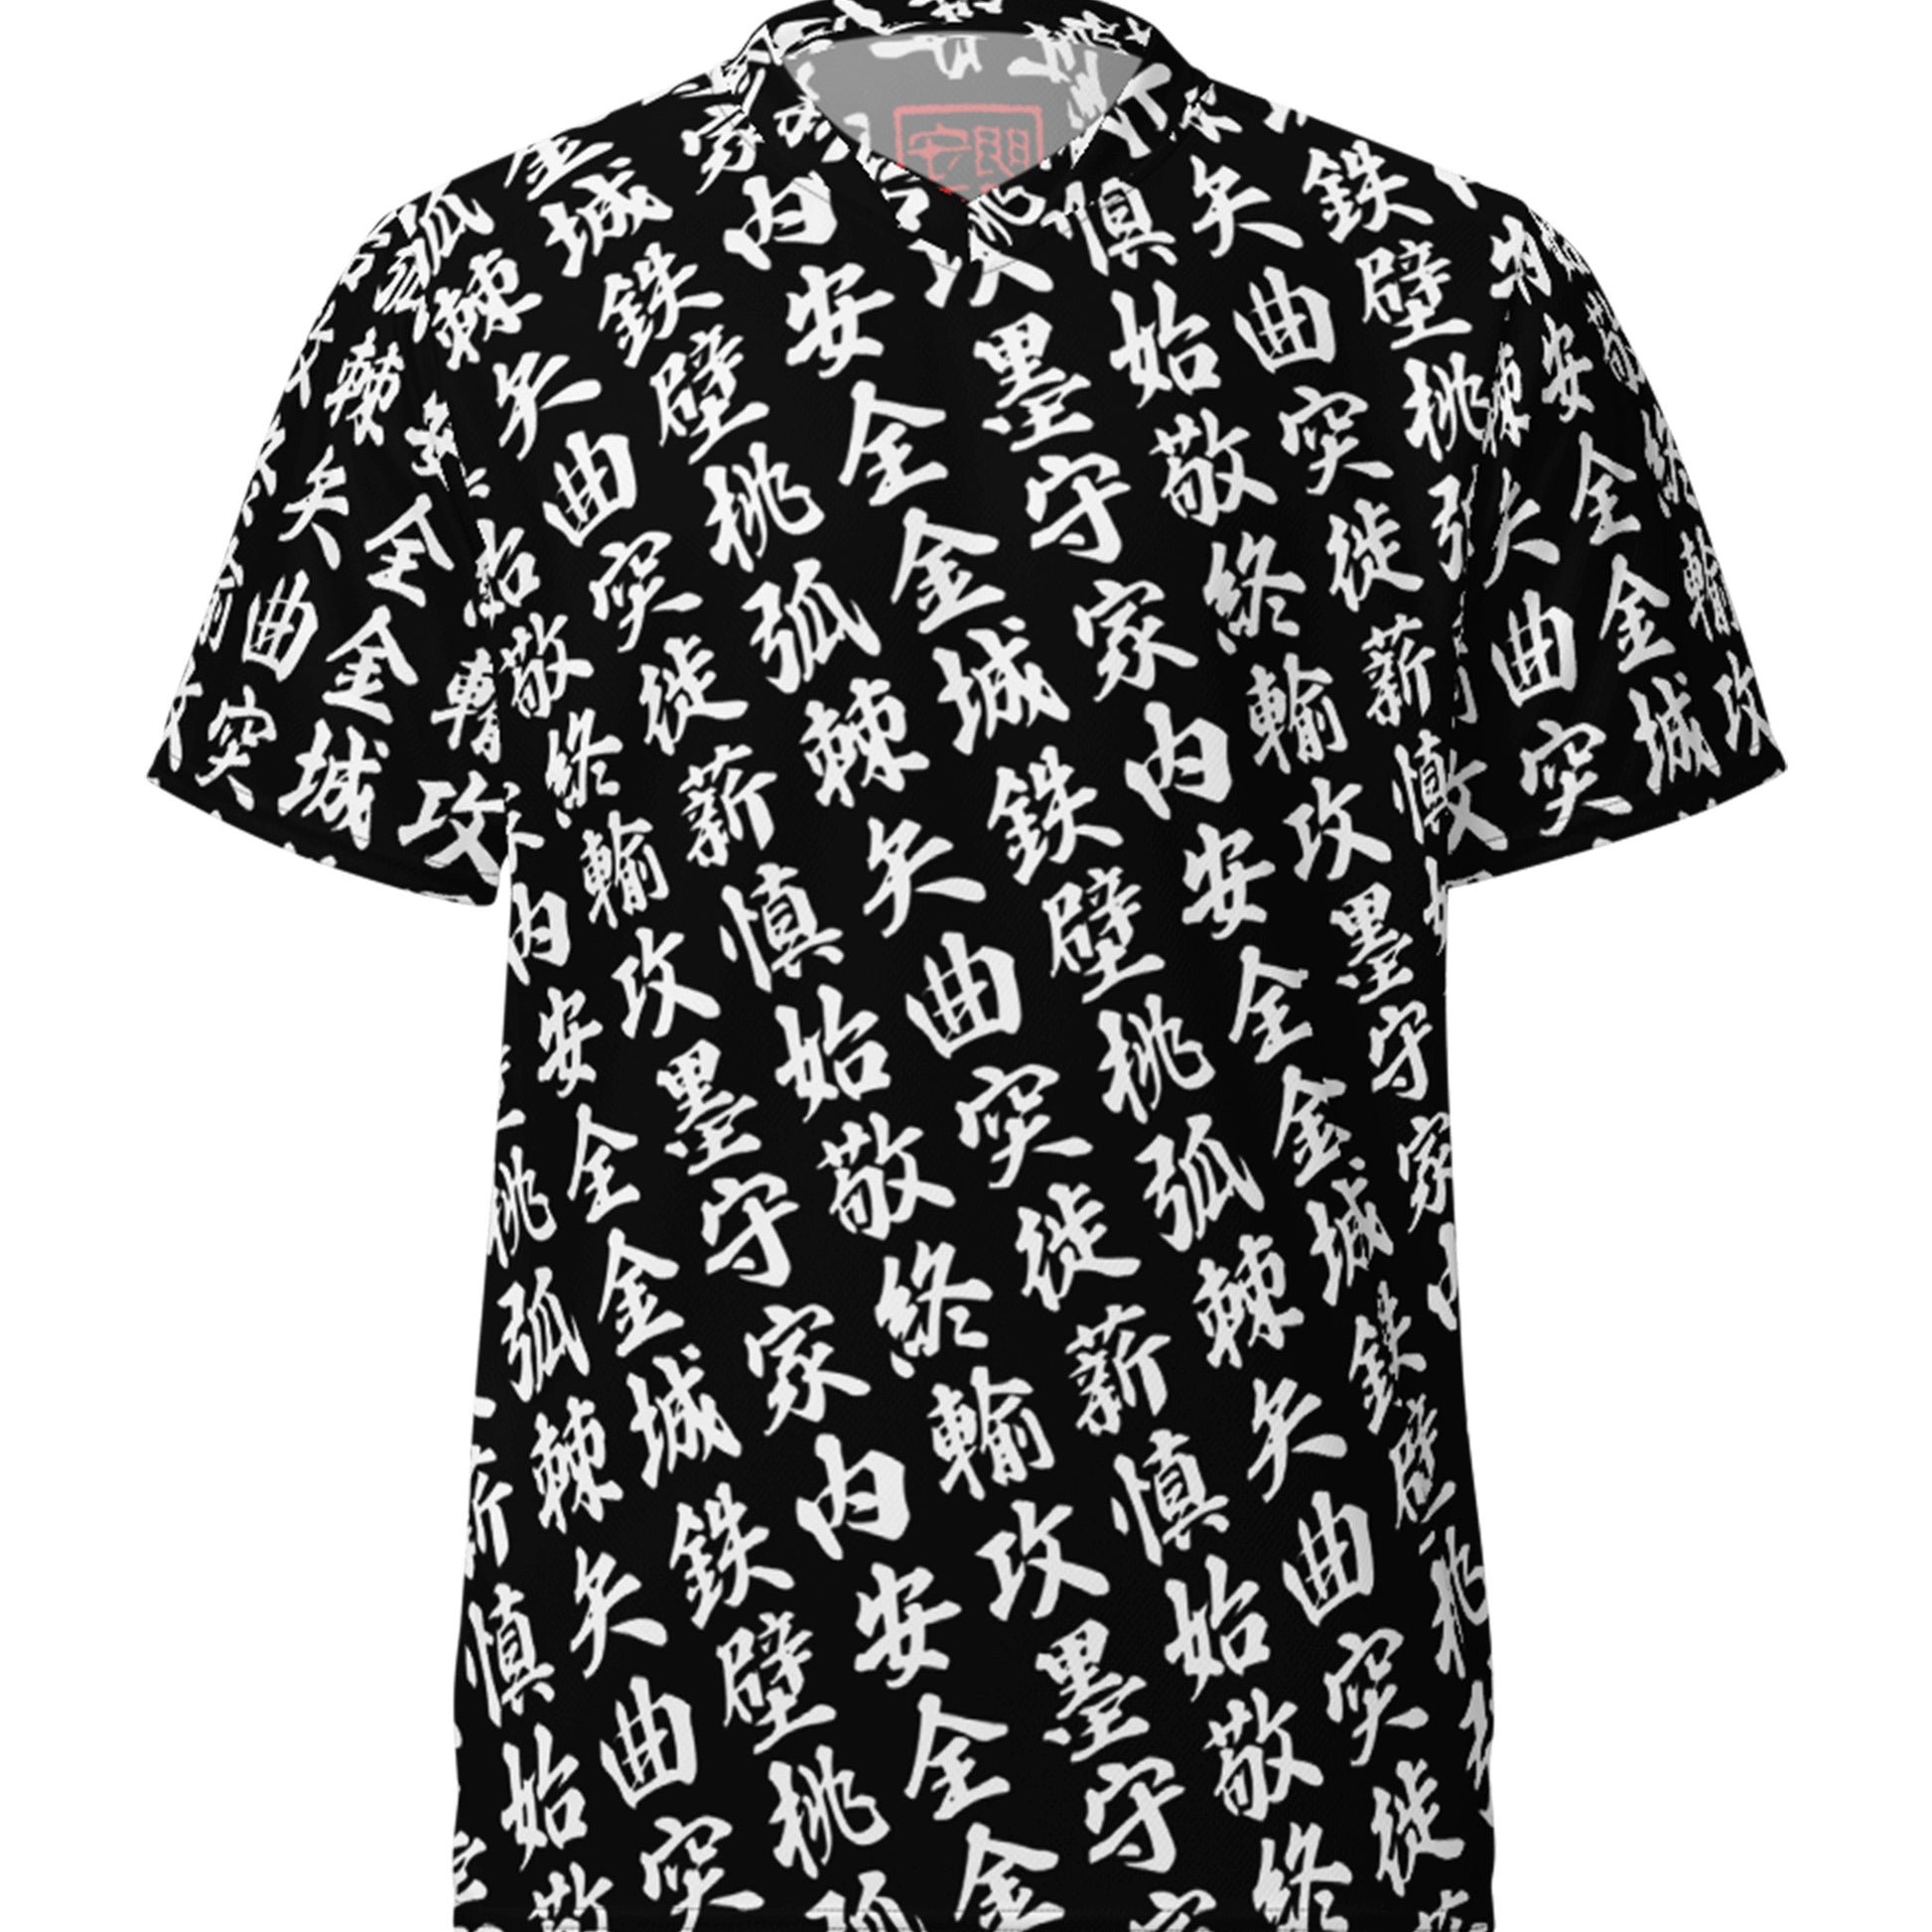 Unisex black Sports Jersey with all-over print in Japanese KANJI - front placement